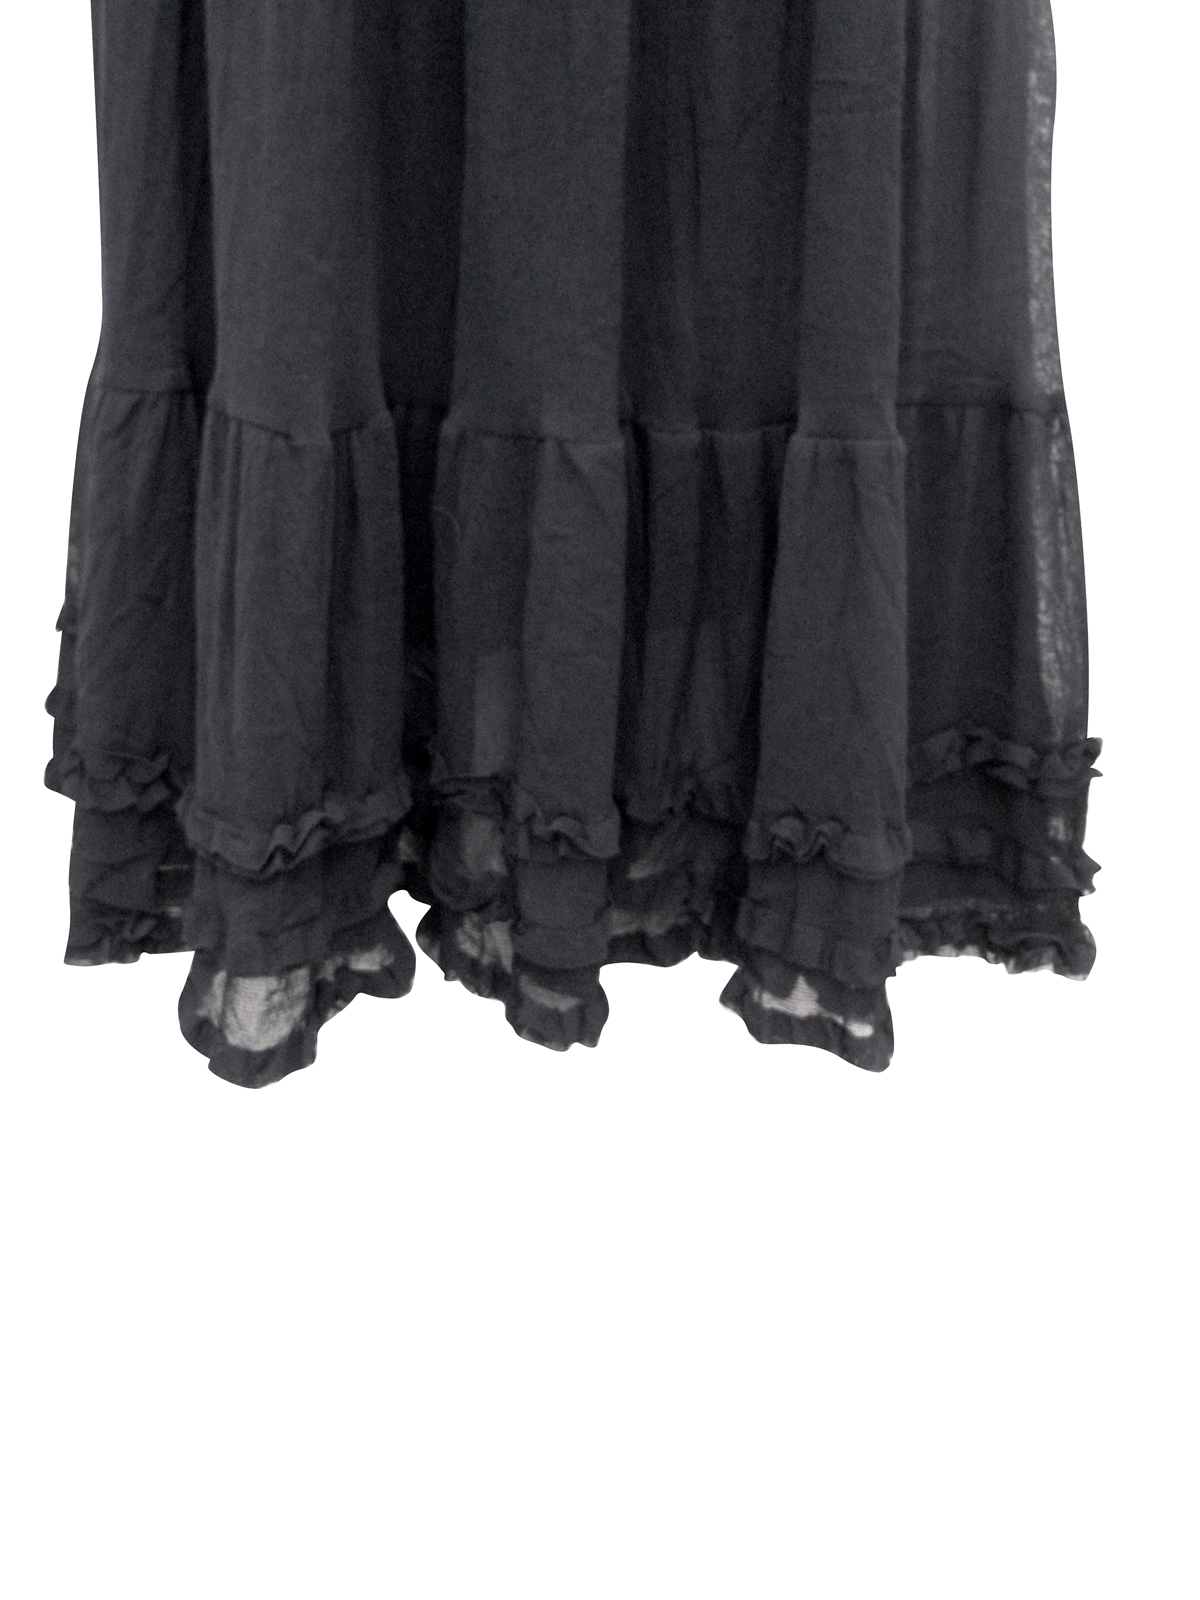 Marks and Spencer - - M&5 BLACK Long Panelled Crepe Skirt - Size 12 to 22